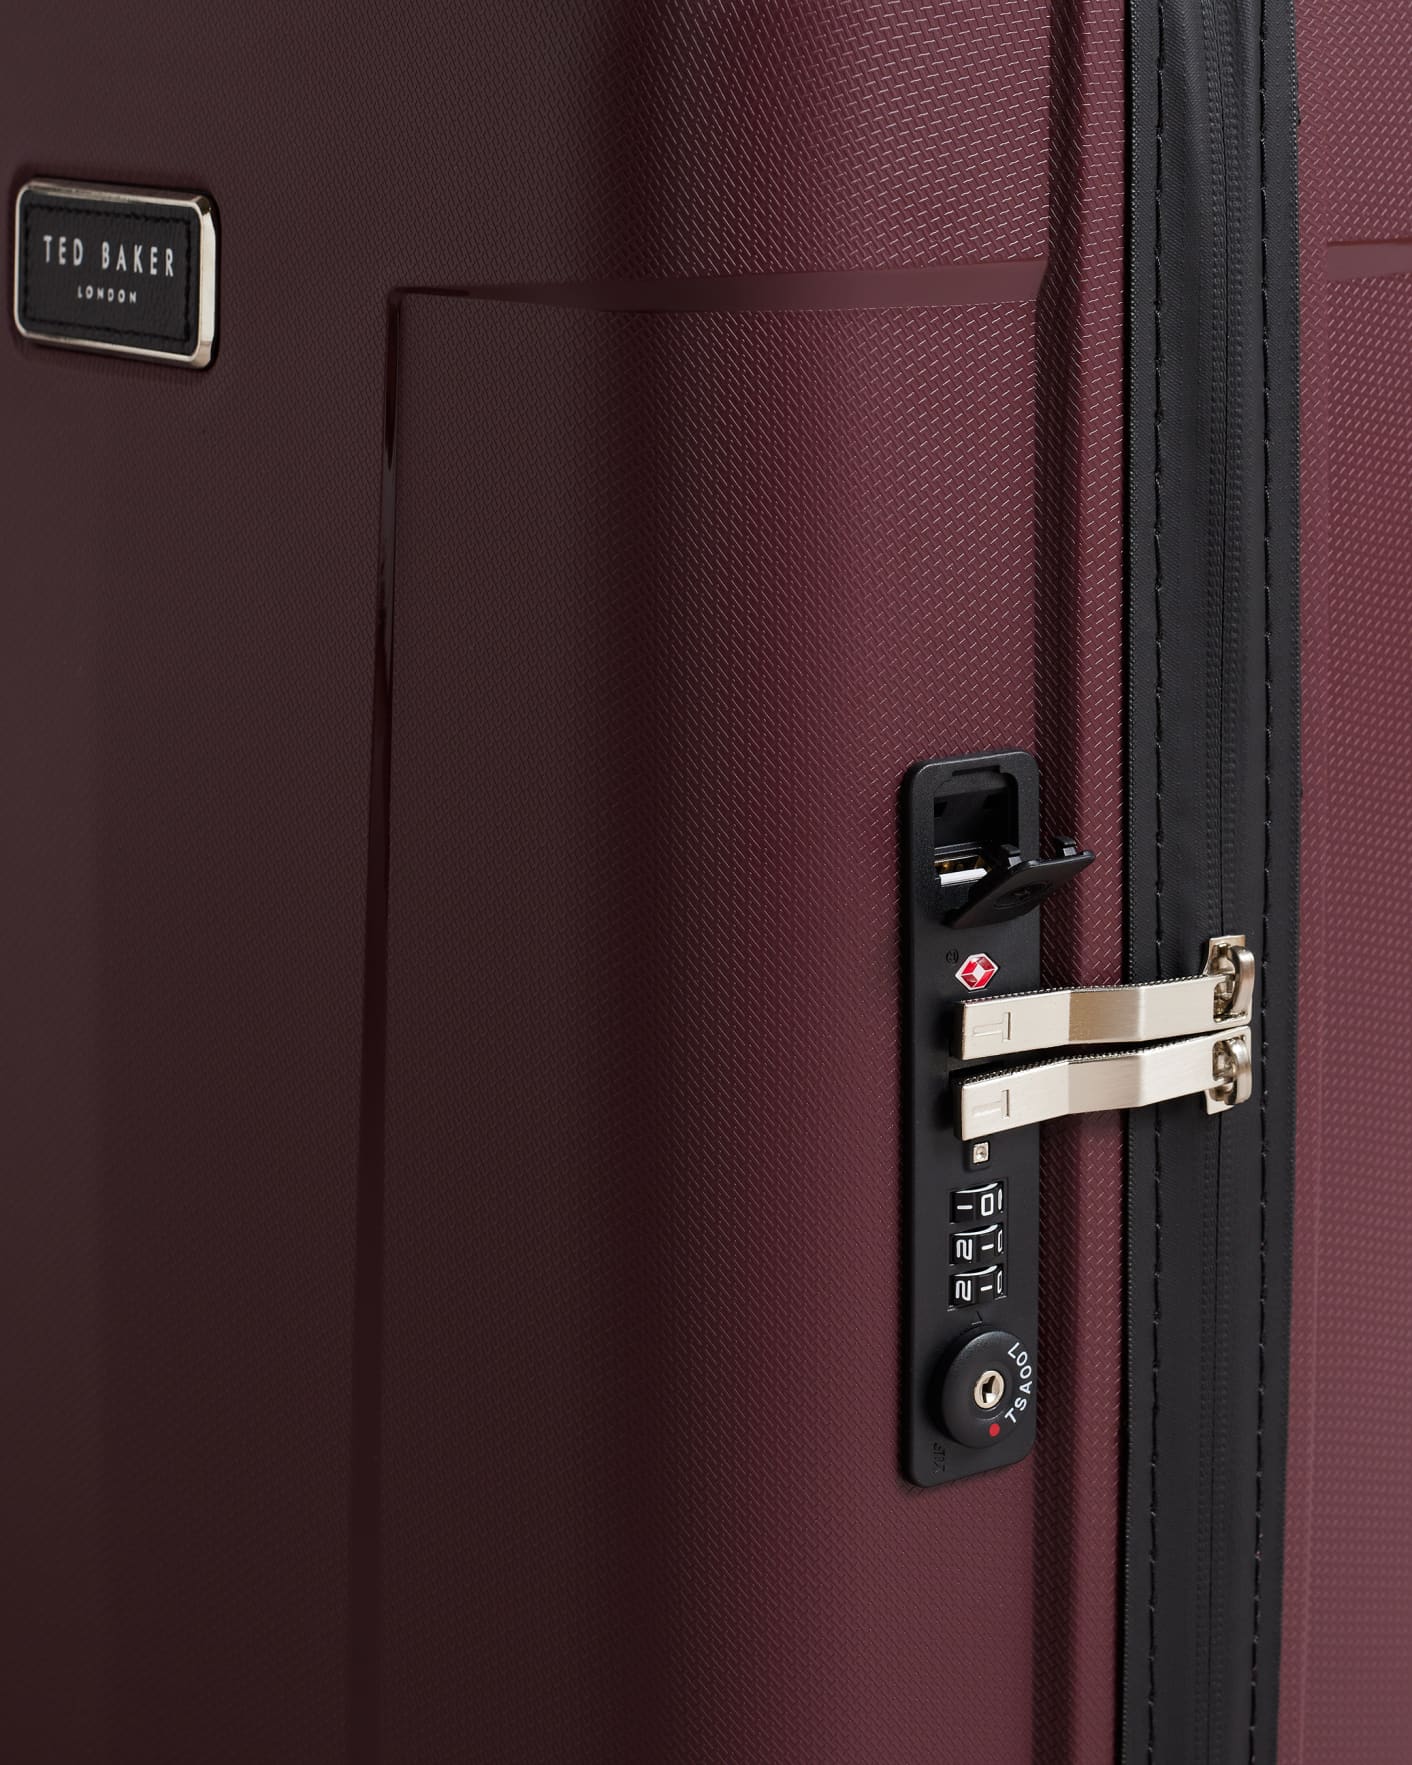 Dark Red Wheeled Trolley Suitcase Ted Baker